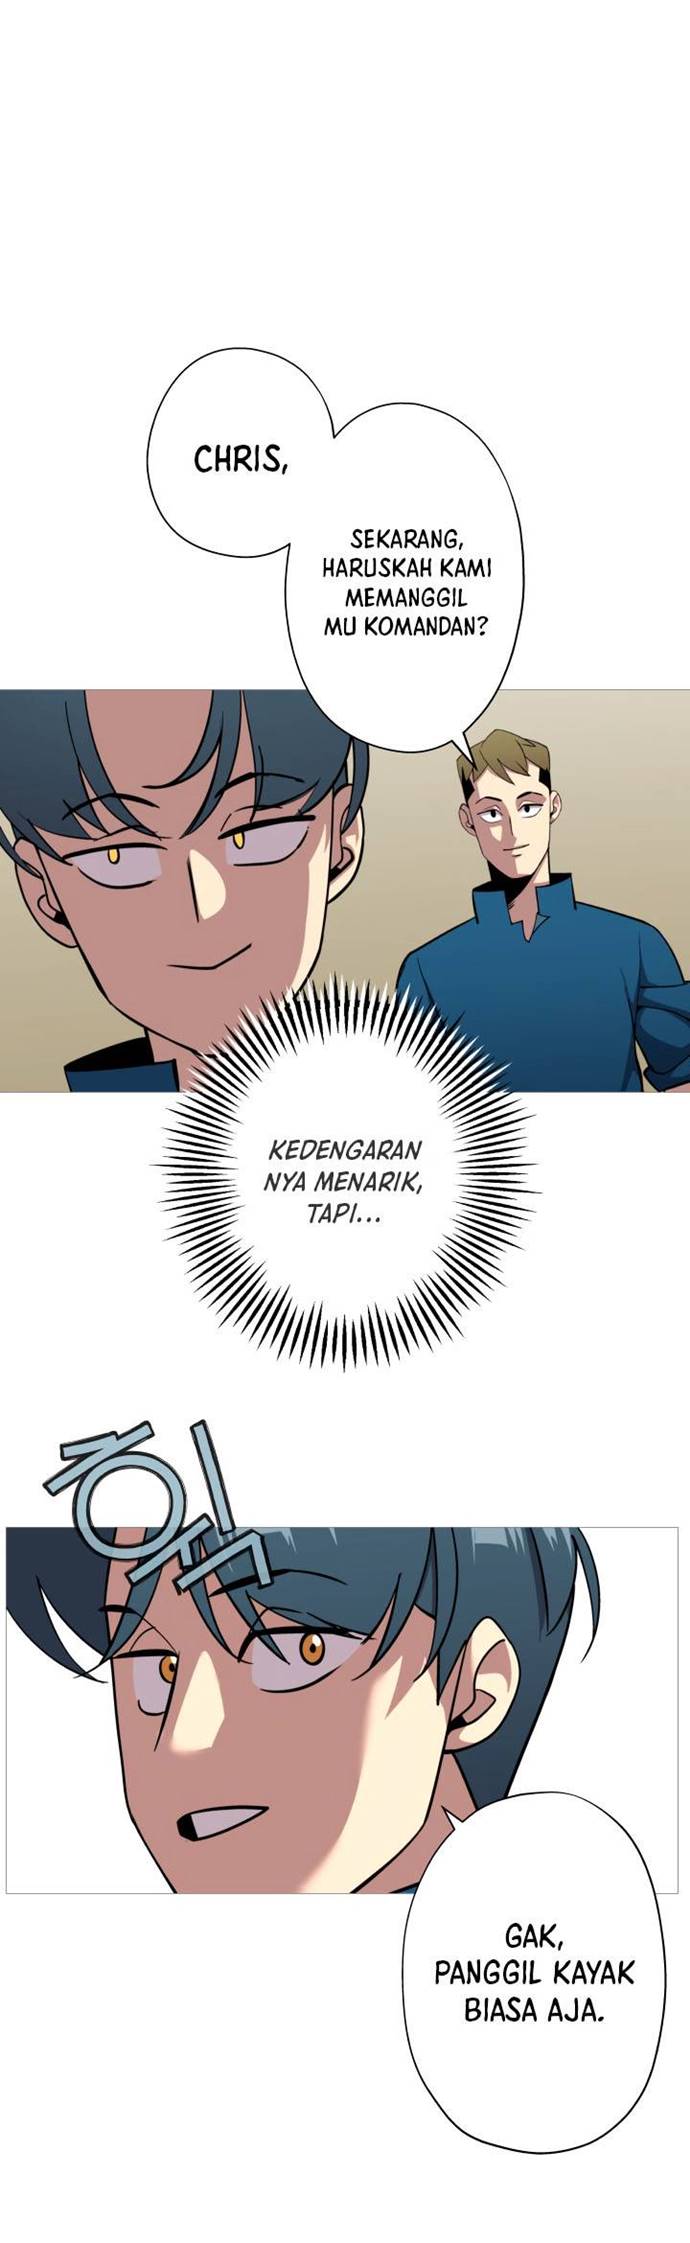 Dilarang COPAS - situs resmi www.mangacanblog.com - Komik the story of a low rank soldier becoming a monarch 007 - chapter 7 8 Indonesia the story of a low rank soldier becoming a monarch 007 - chapter 7 Terbaru 7|Baca Manga Komik Indonesia|Mangacan